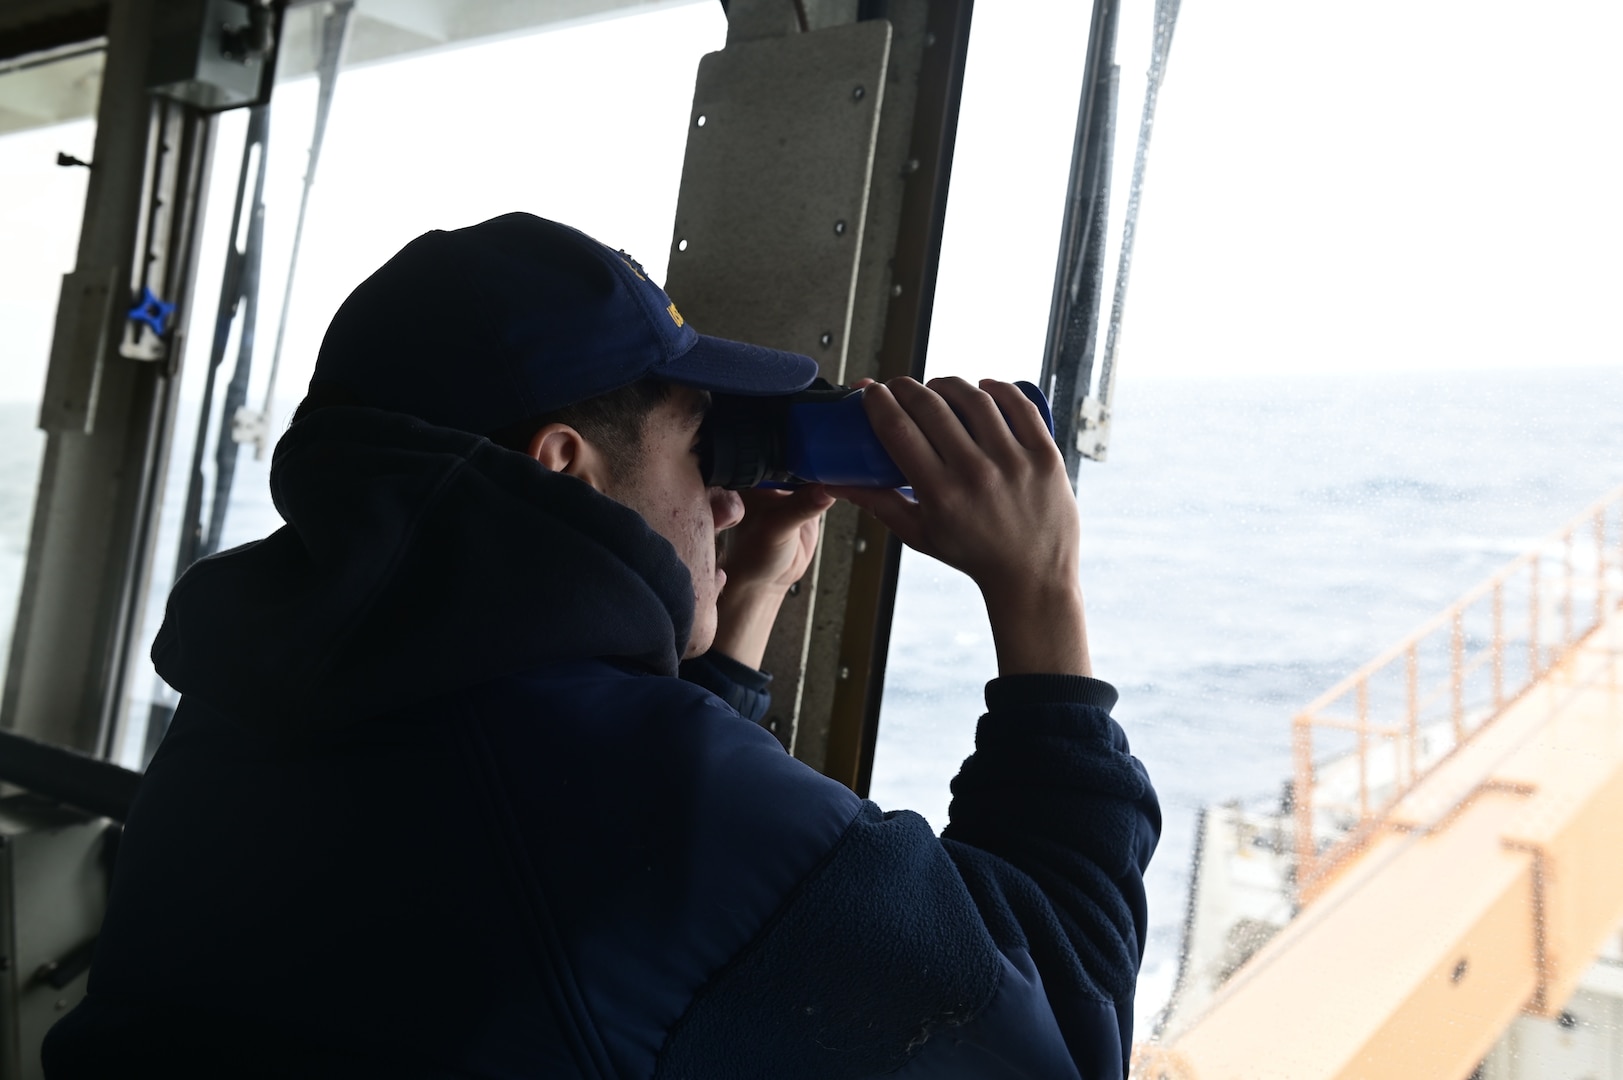 U.S. Coast Guard Seaman Jerry Cook stands lookout watch on the bridge of USCGC Sycamore (WLB 209) while en route to Exercise Argus, North Atlantic Ocean, June 2, 2023. Exercise Argus is a joint search and rescue and marine environmental response exercise that includes assets from the United States, Denmark, Greenland, and France. (U.S. Coast Guard photo by Petty Officer 2nd Class Ryan Schultz)